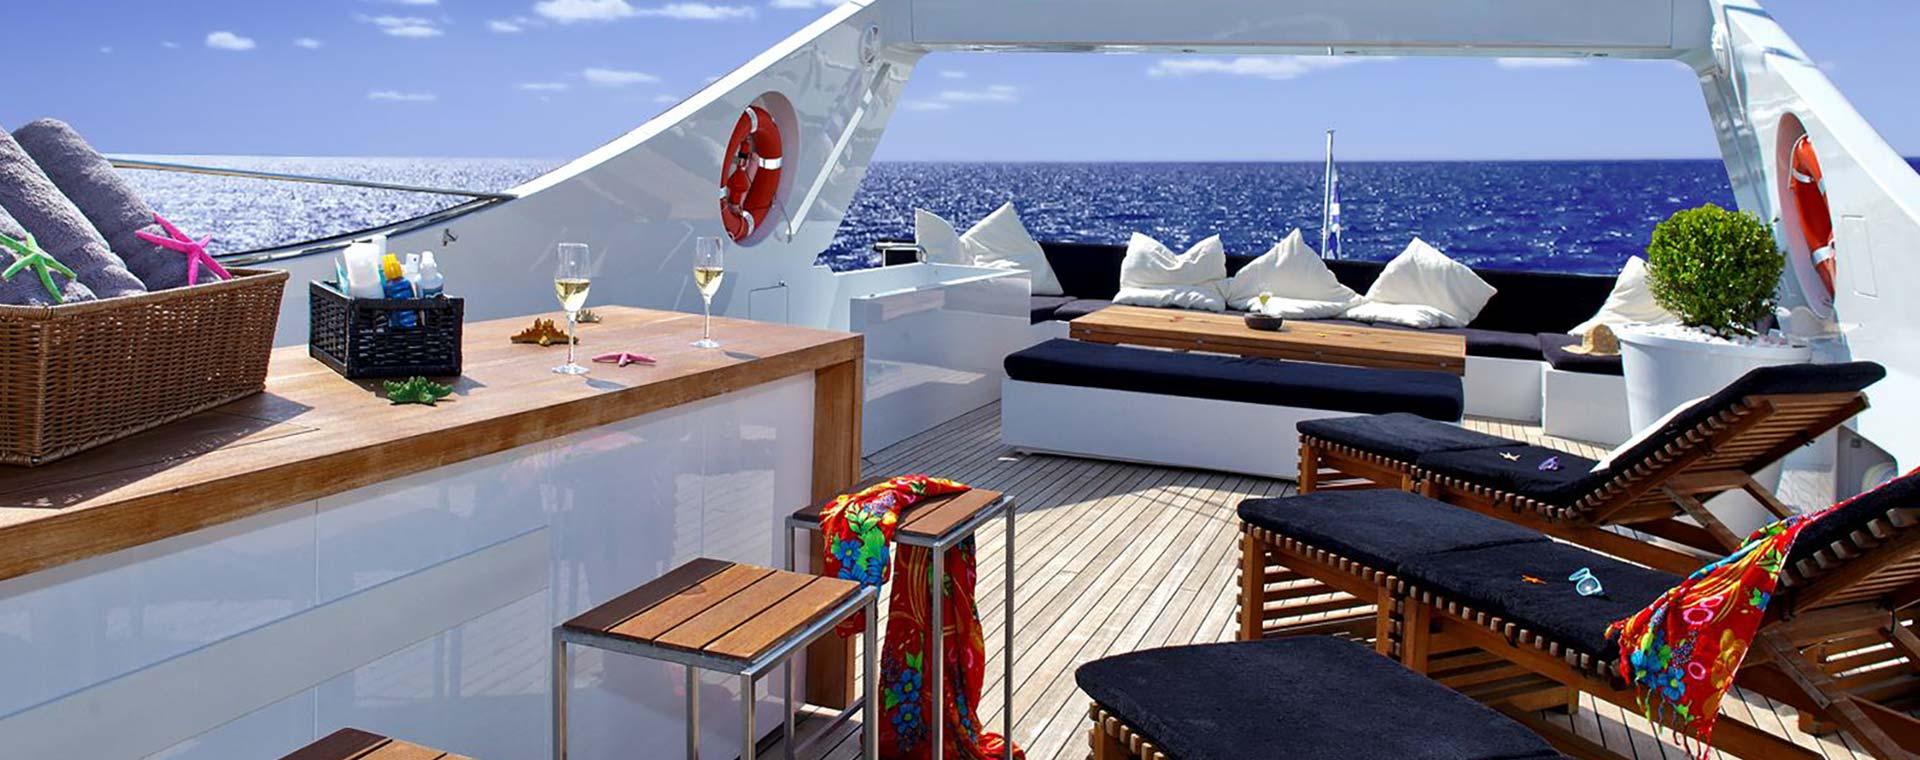 Athens Gold Yachting - Tropicana / Admiral 32 deck salon